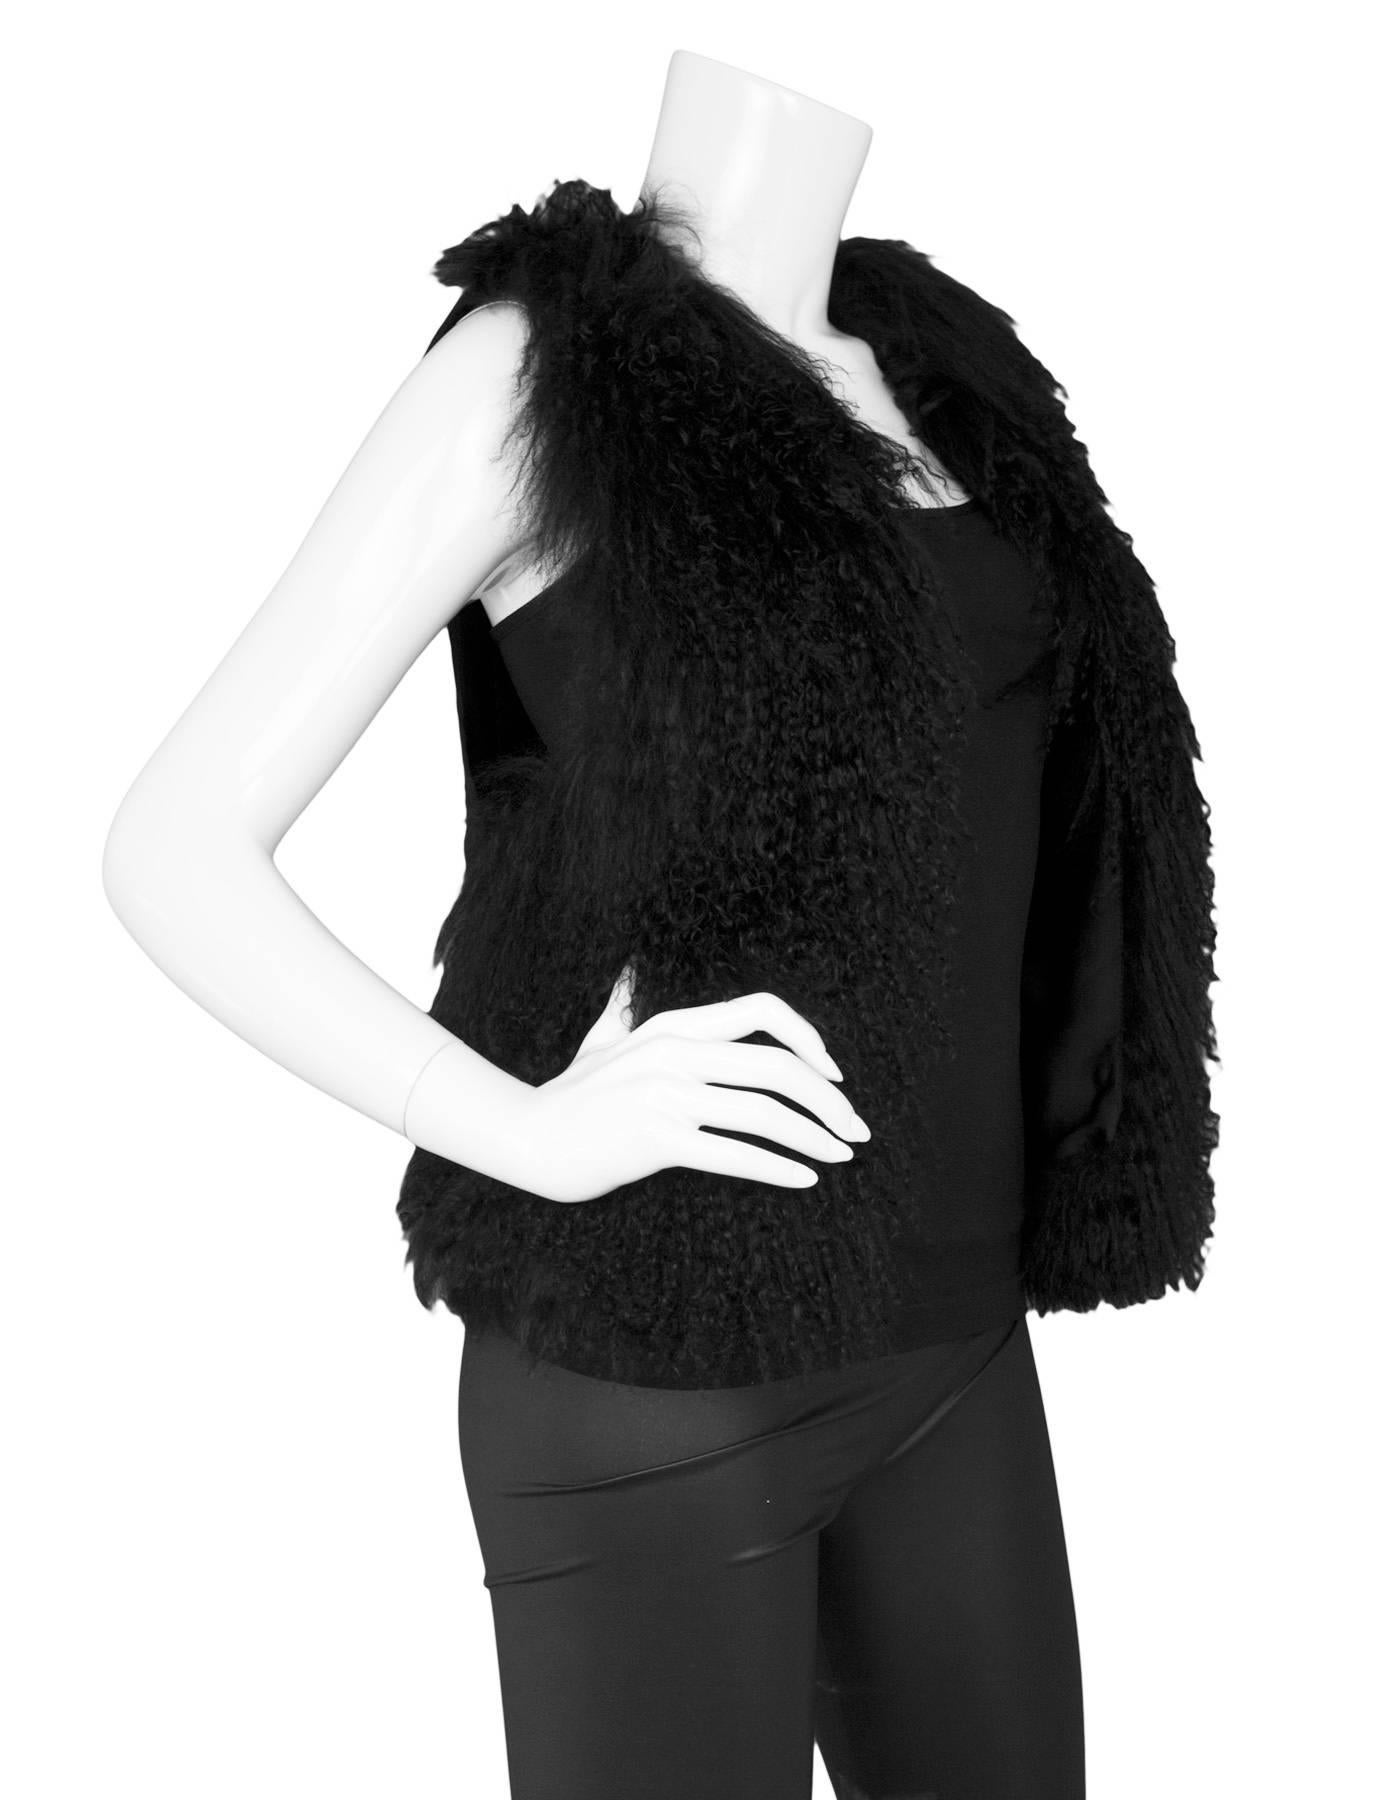 Michael Michael Kors Black Mongolian Lamb Fur Vest 
Features fabric back panel and mongolian lamb fur front panels

Made In: China
Color: Black
Composition: 100% Mongolian lamb fur and 10% polyester
Lining: Black, 100% polyester
Closure/Opening: